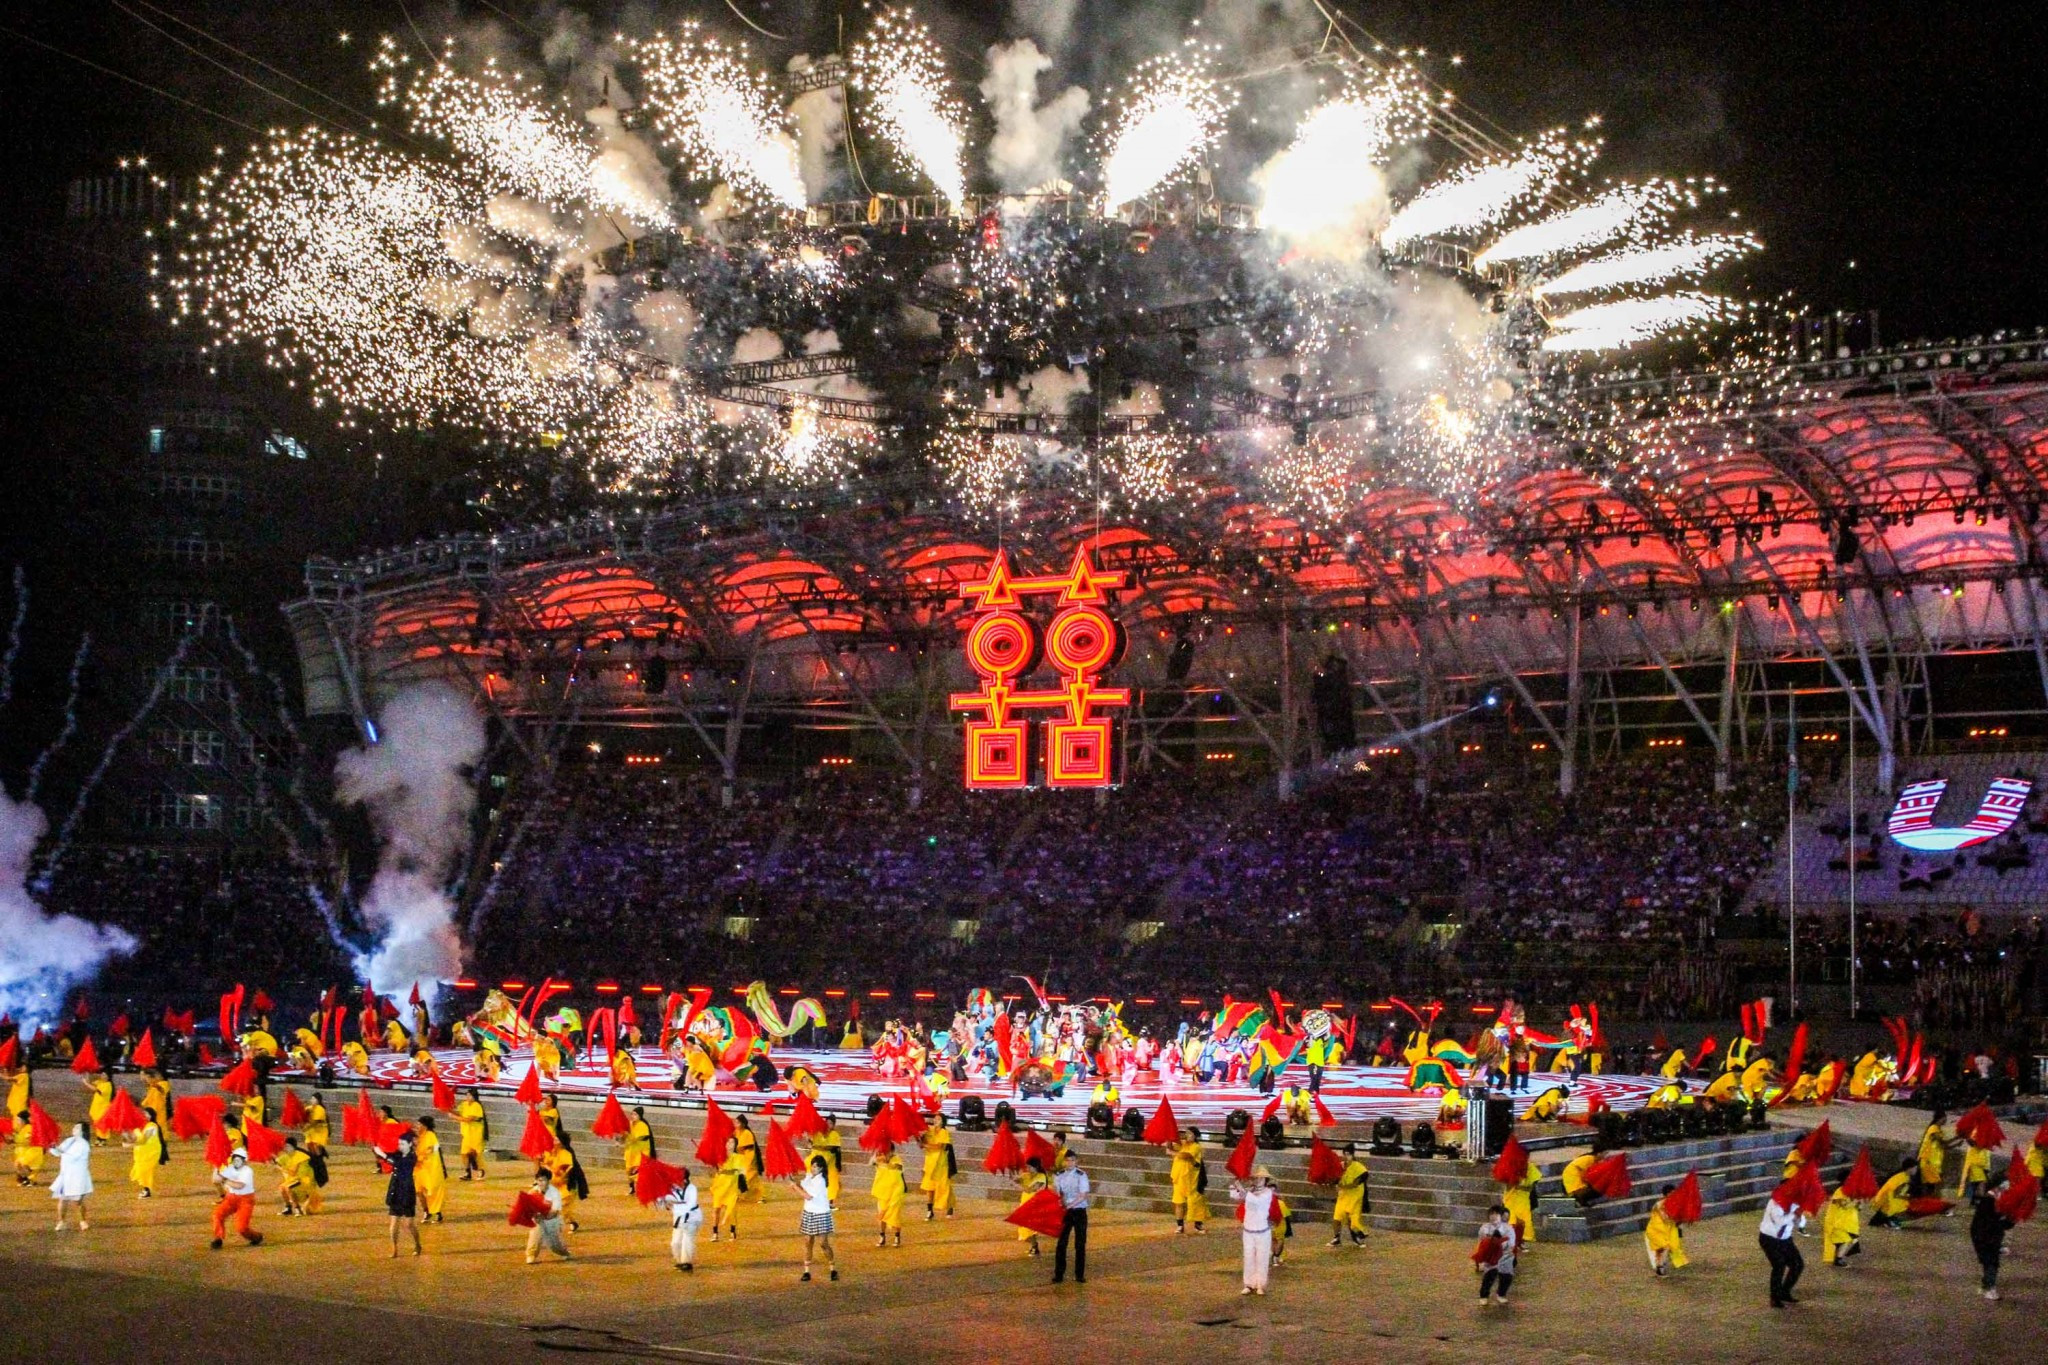 Taipei 2017 was officially declared open this evening ©Taipei 2017